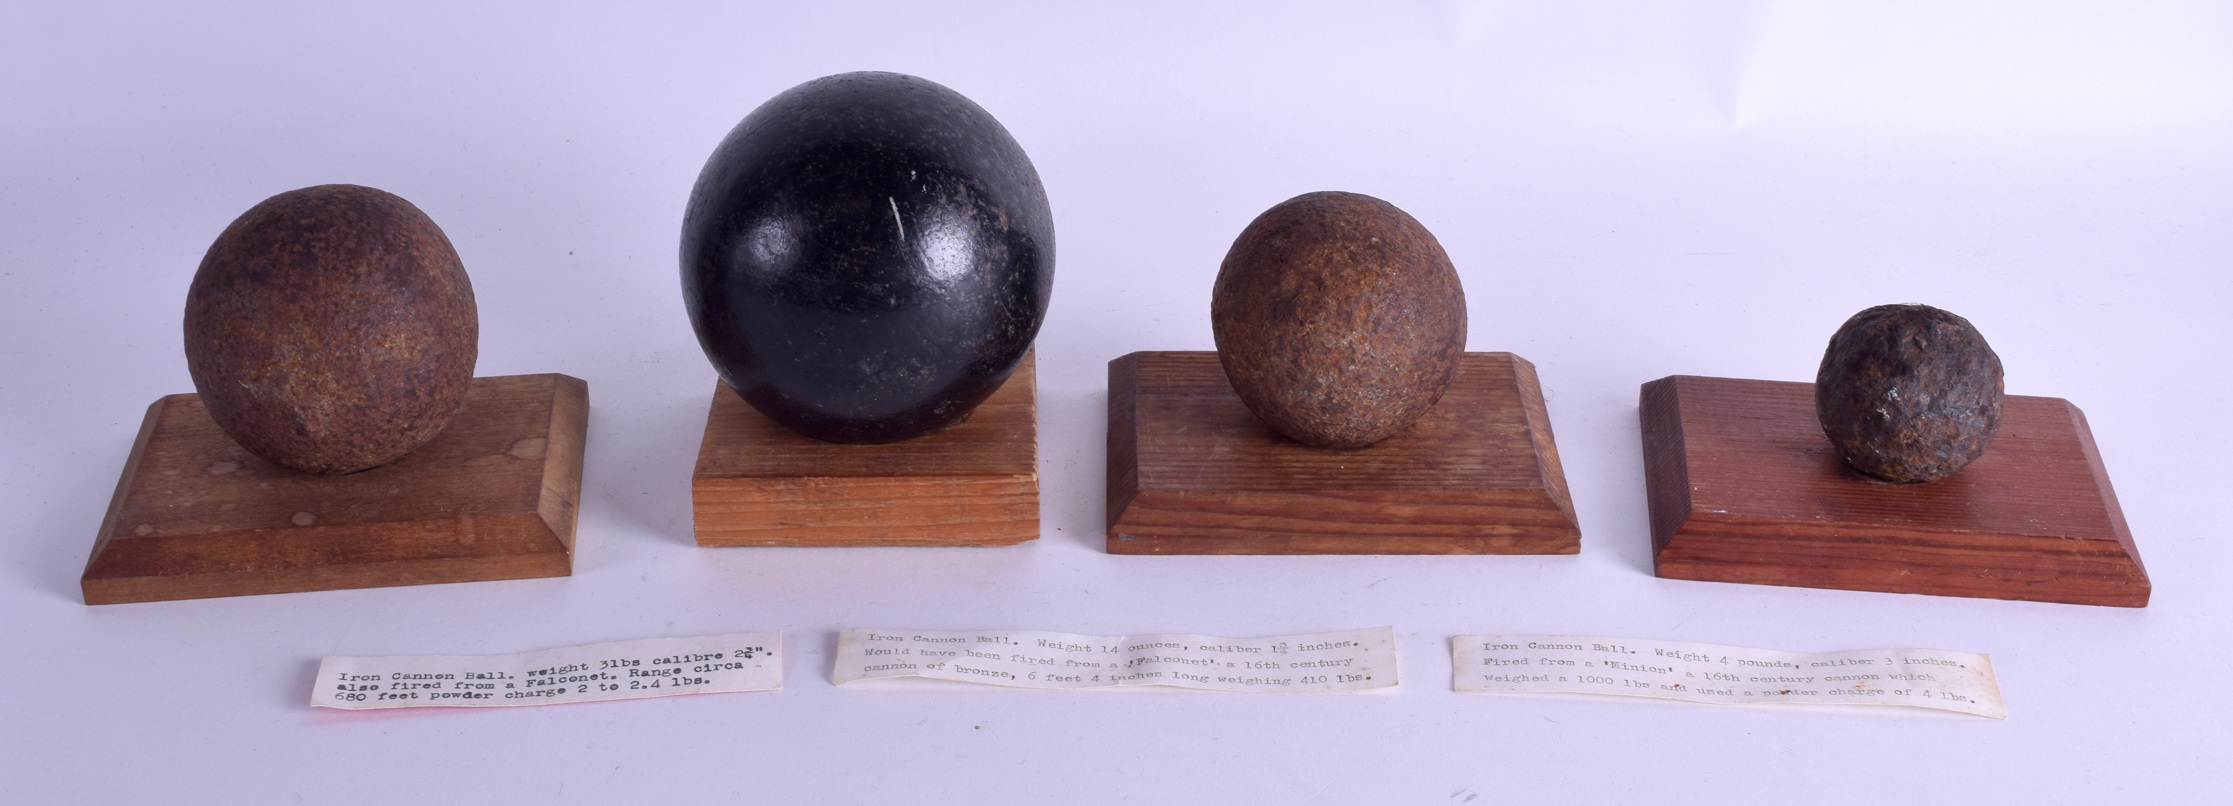 FOUR 16TH/17TH CENTURY CANNONBALLS. Largest 7 cm wide. (4)